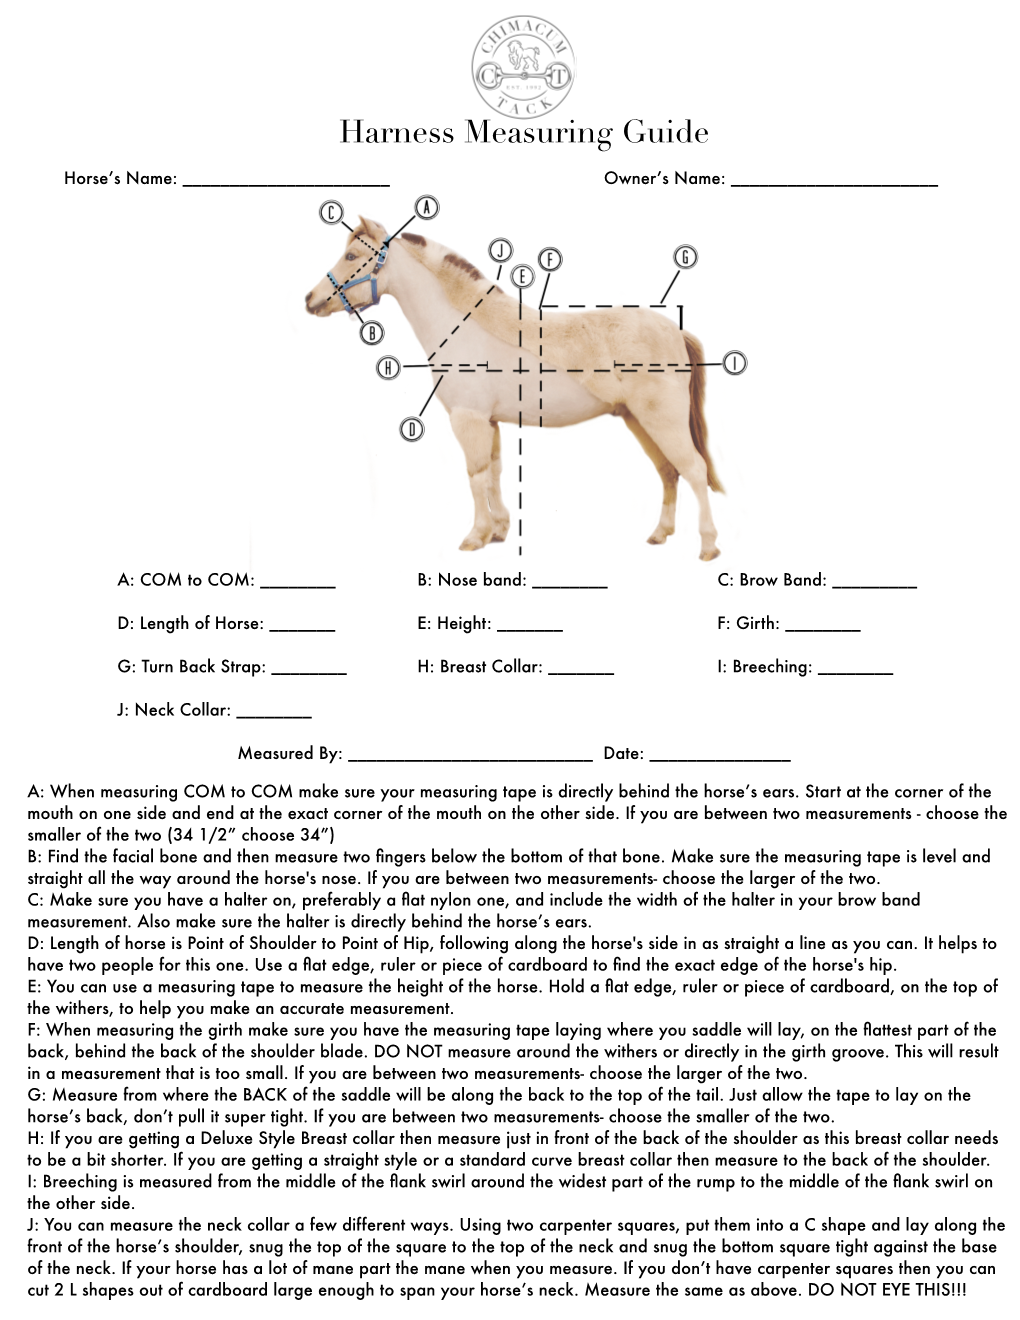 Harness Measuring Guide